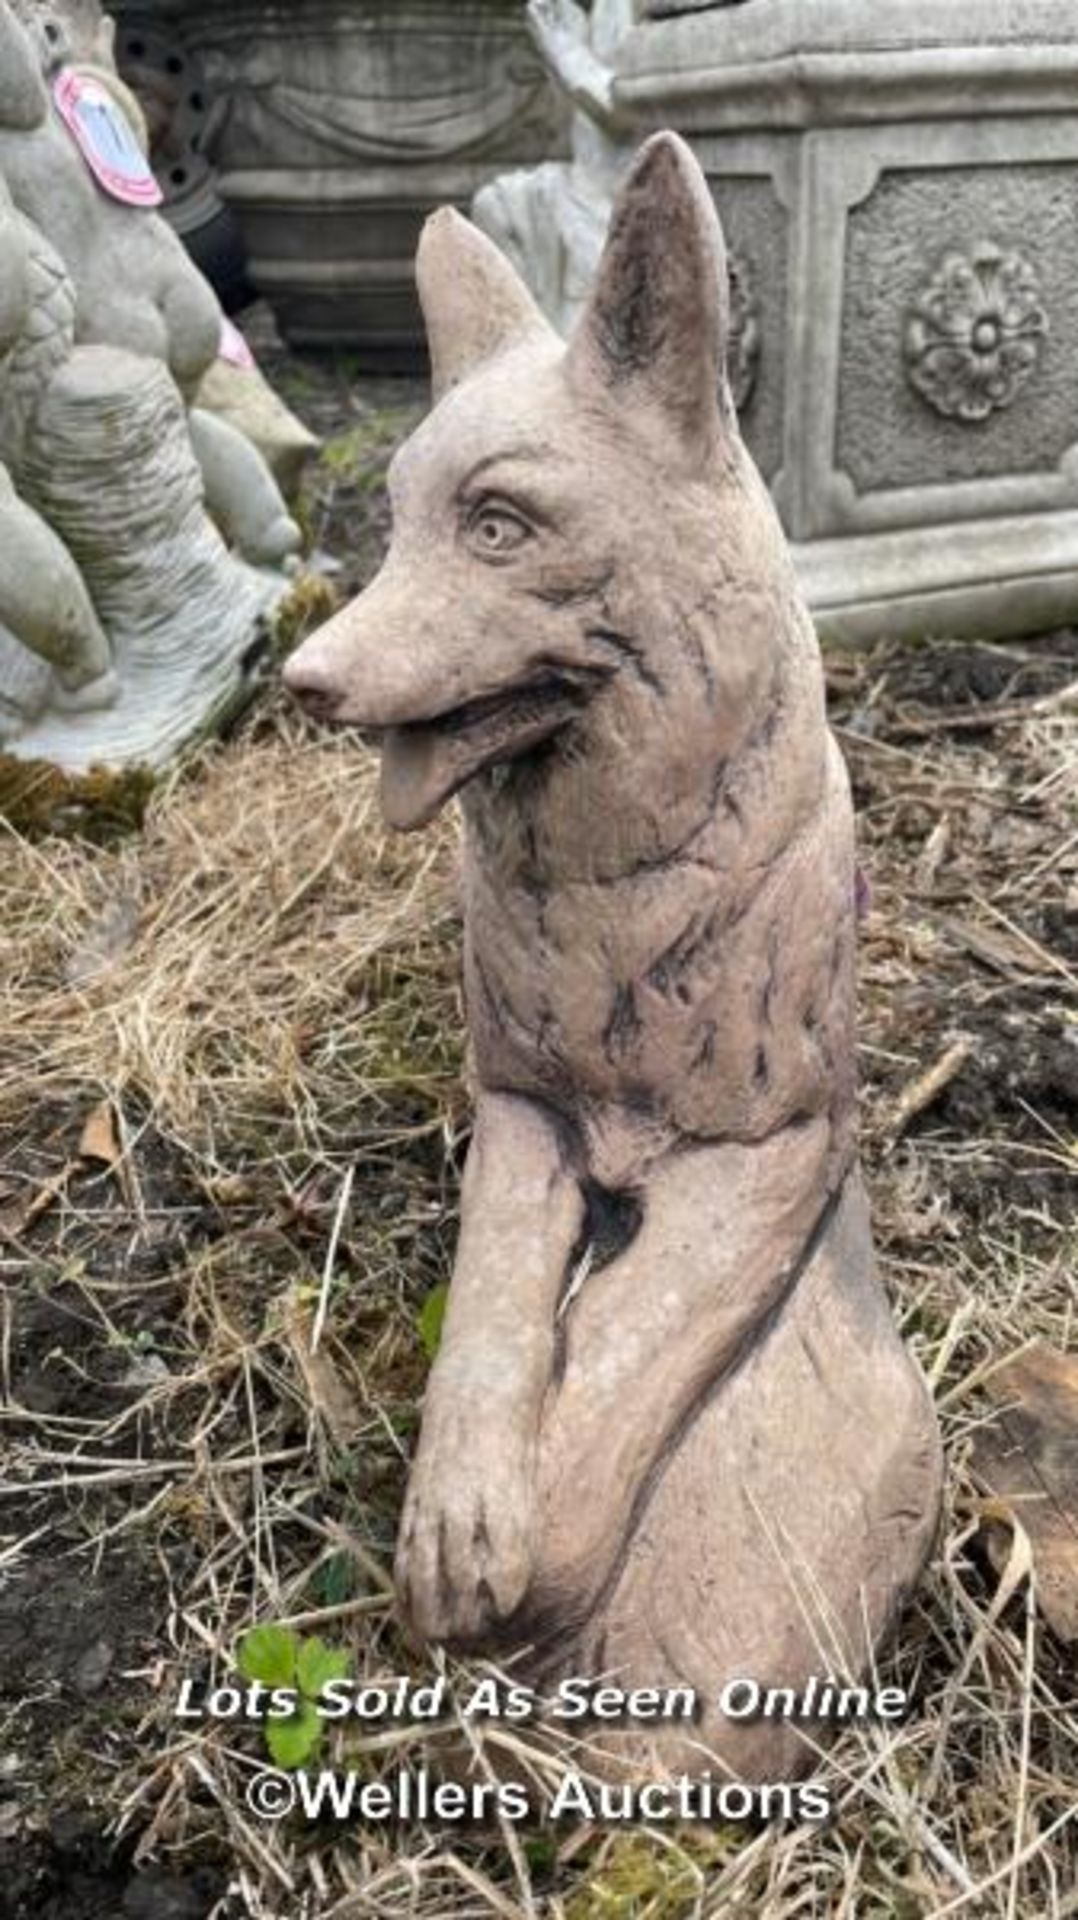 *RELAXING BORDER COLLIE, 47CM (L) X 33CM (H) / COLLECTION LOCATION: ALBOURNE (BN6), FULL ADDRESS AND - Image 3 of 3